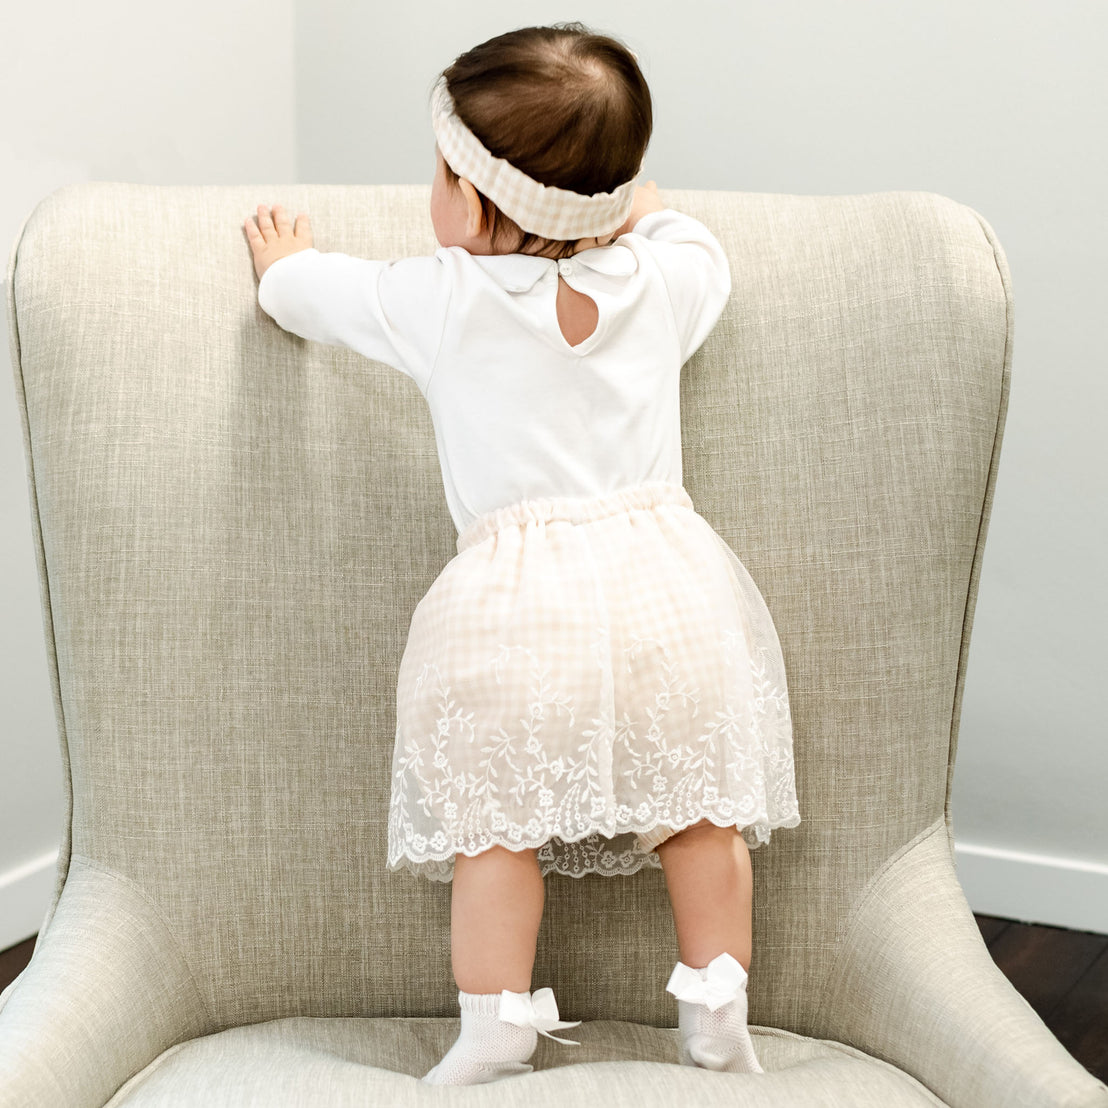 A toddler in an Isla Bubble Skirt Set and matching Isla Tie Headband stands on a beige armchair, facing away from the camera and holding onto the chair's back.